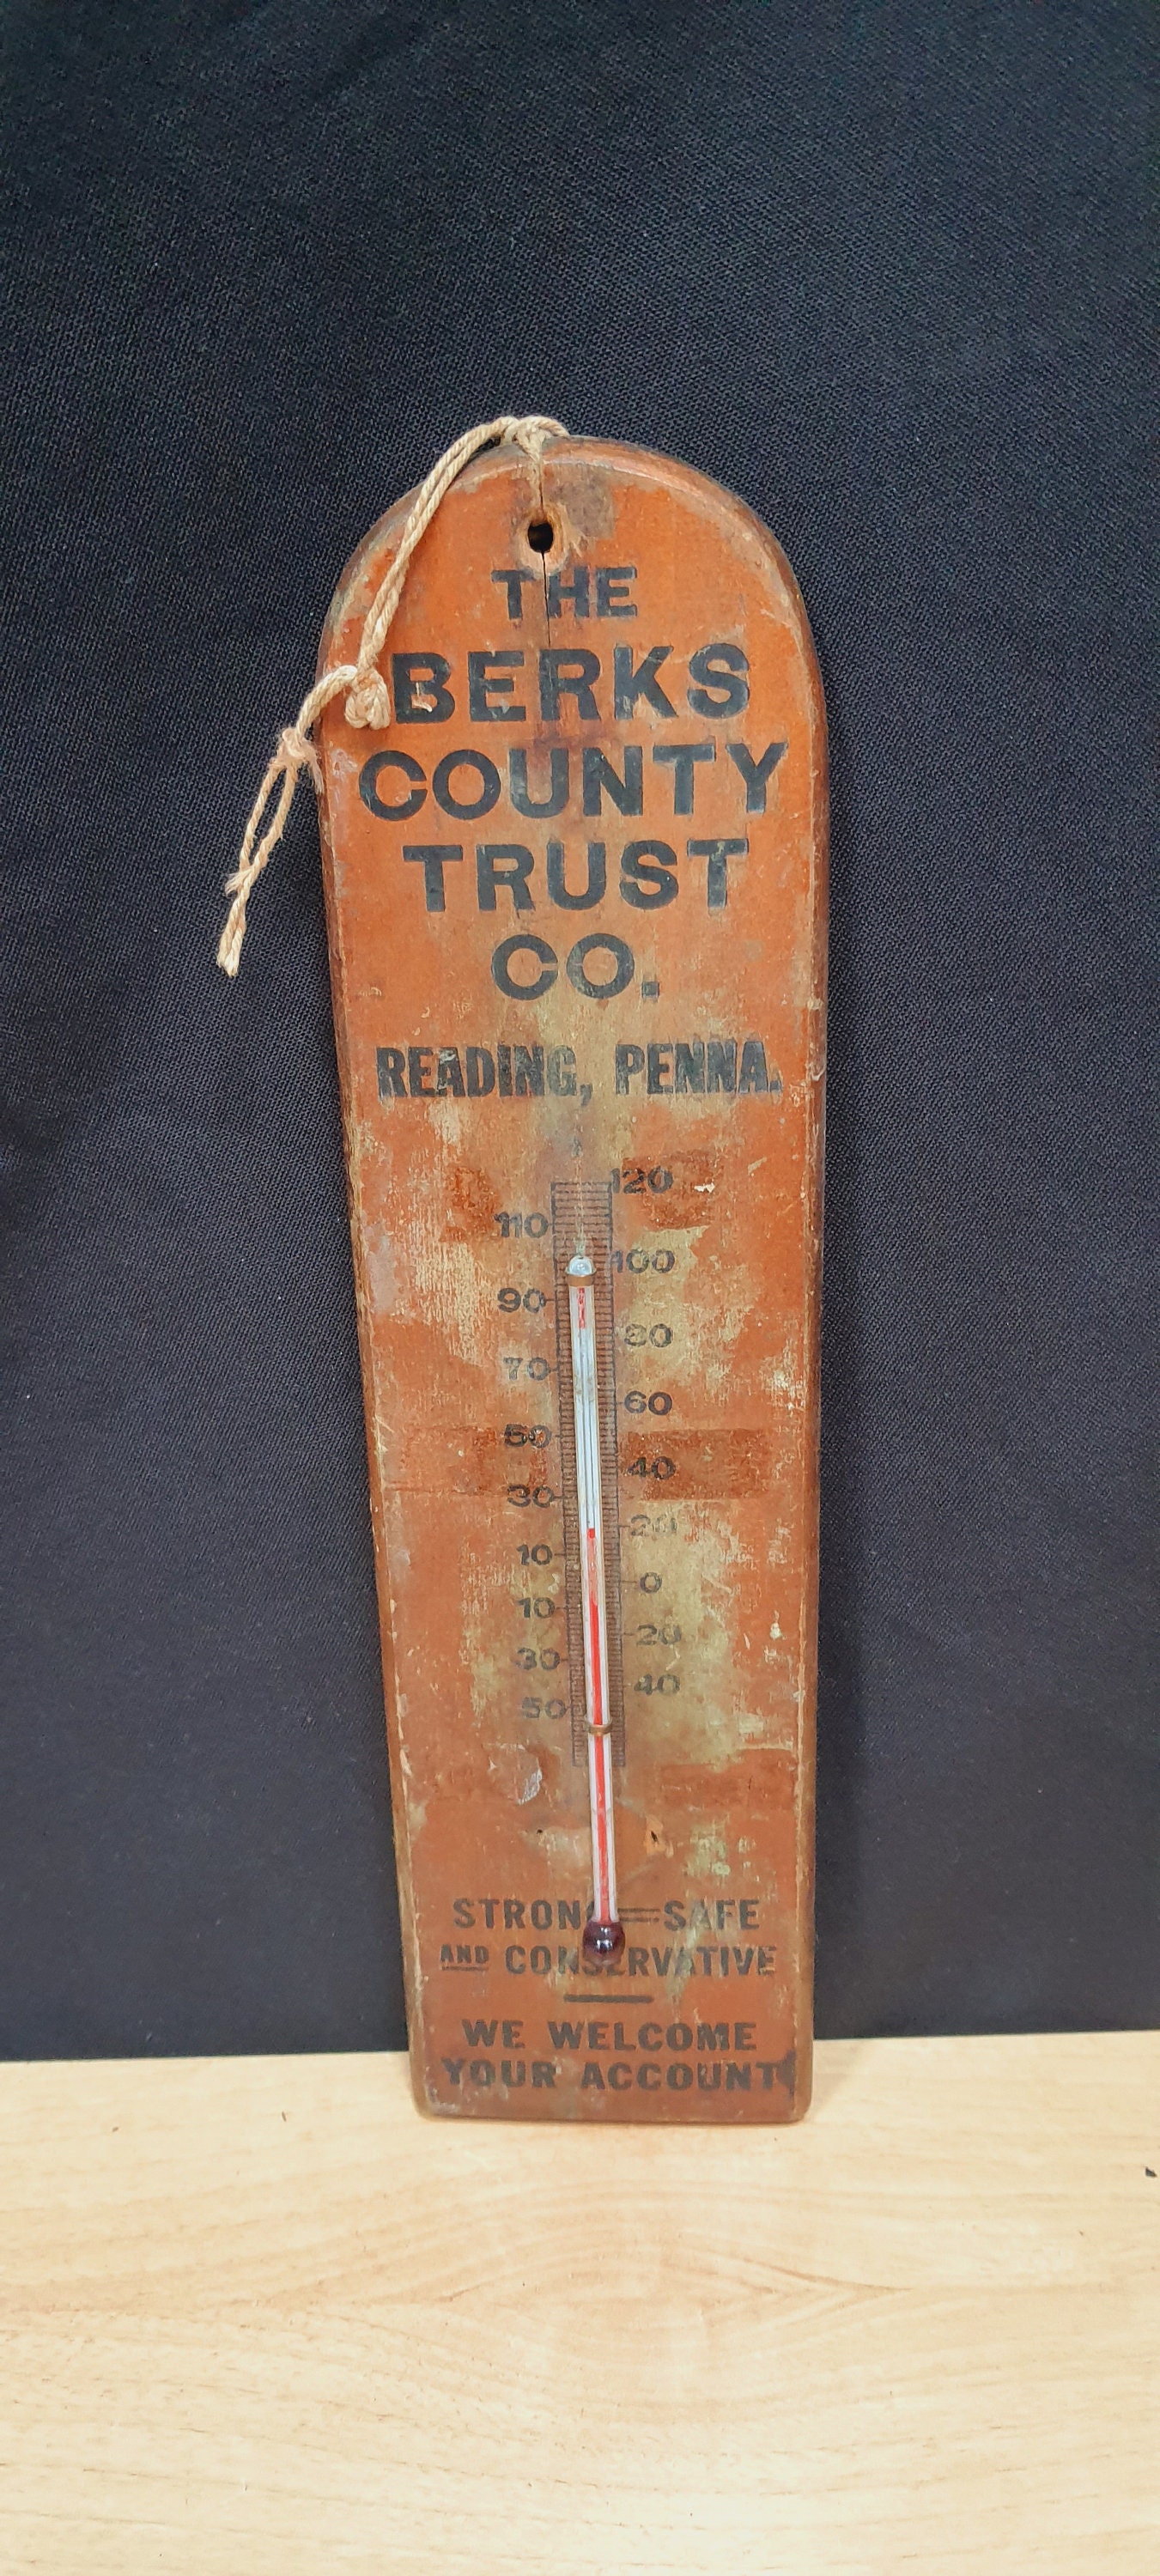 Vintage Advertising Thermometer Harley Davidson Sales and Service Metal Wall  Thermometer Wall Decor Man Cave Garage Panchosporch 